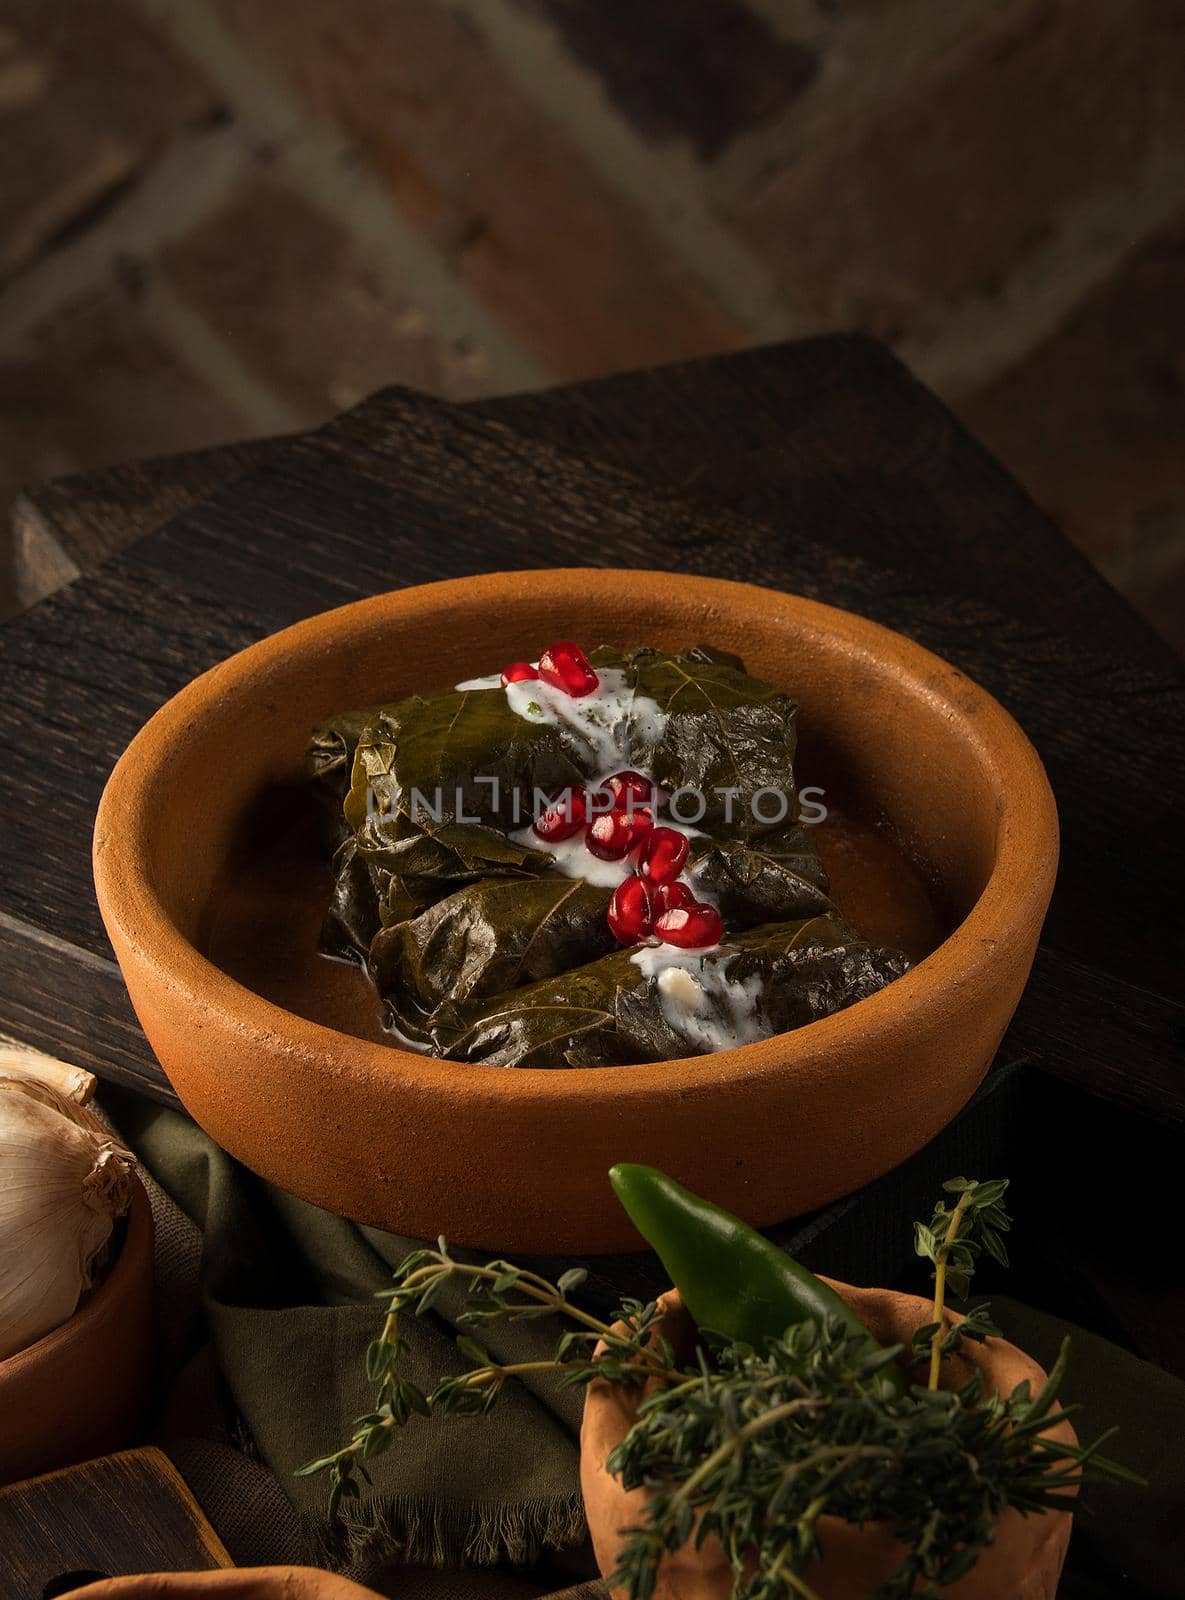 Dolma covered in grape leaves